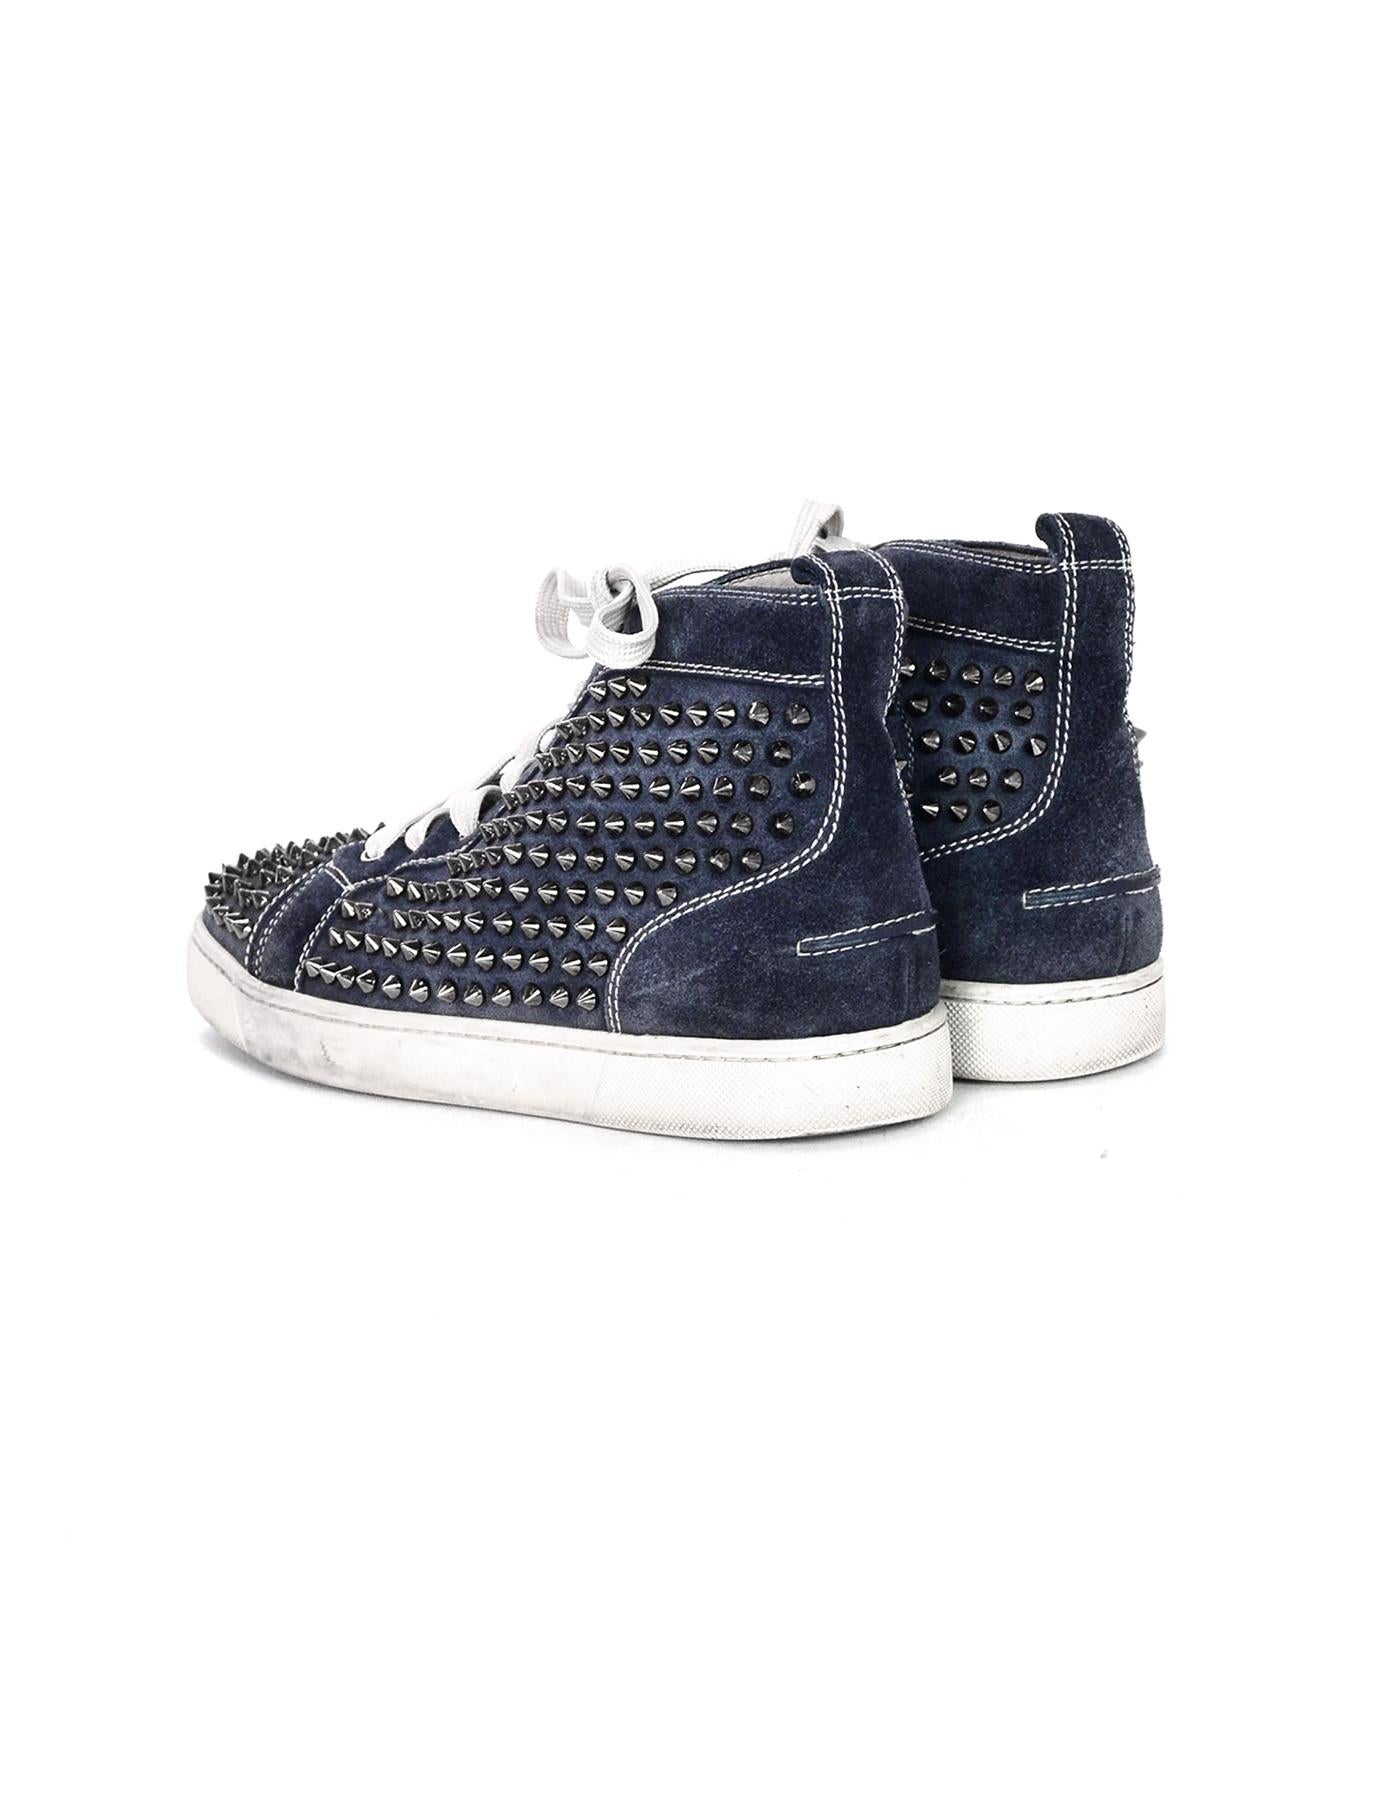 Christian Louboutin Navy Suede Louis Spiked Hi Top Sneakers Sz 40.5 W/ 2 DB In Good Condition In New York, NY